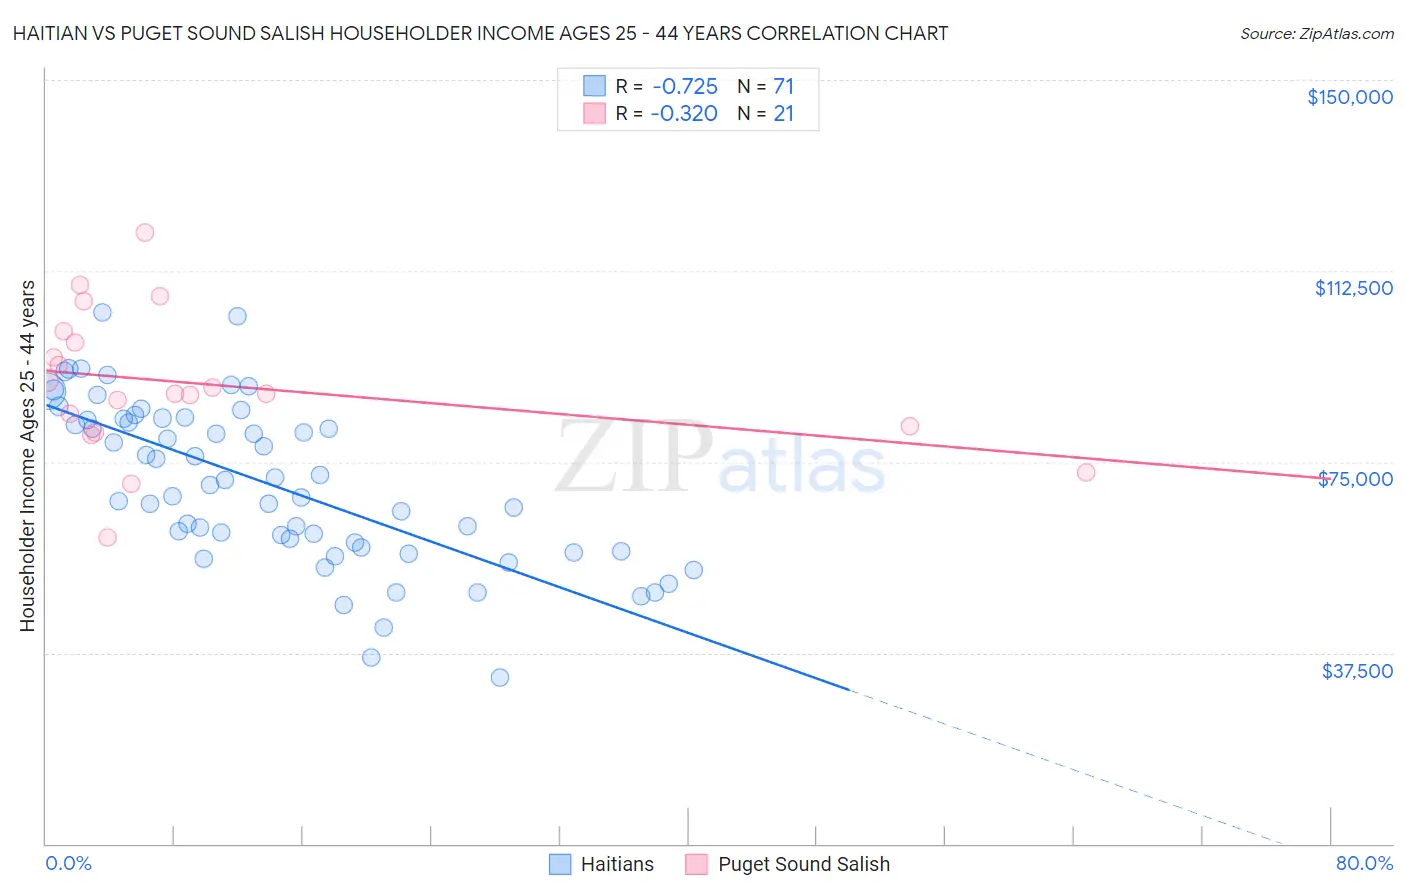 Haitian vs Puget Sound Salish Householder Income Ages 25 - 44 years